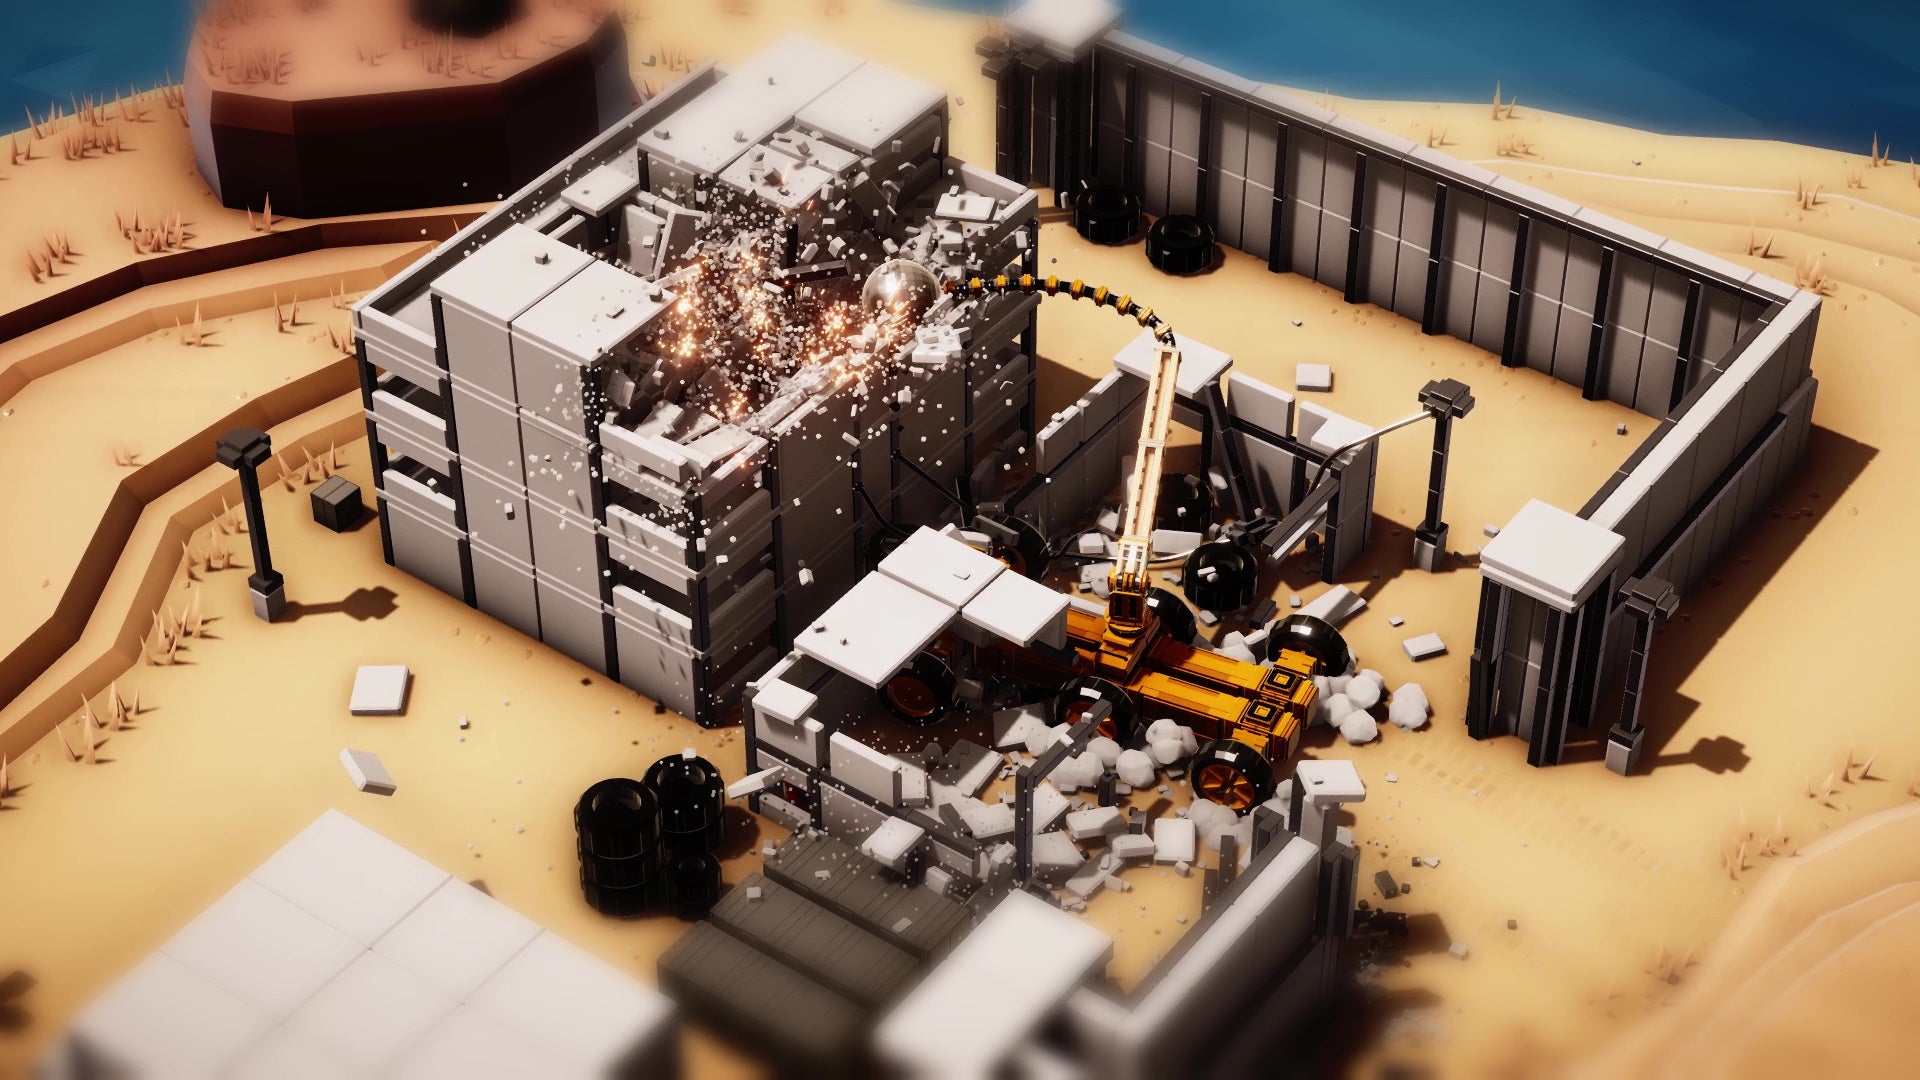 A screenshot from Instruments Of Destruction which shows a wrecking ball bulldozer smashing up some buildings.